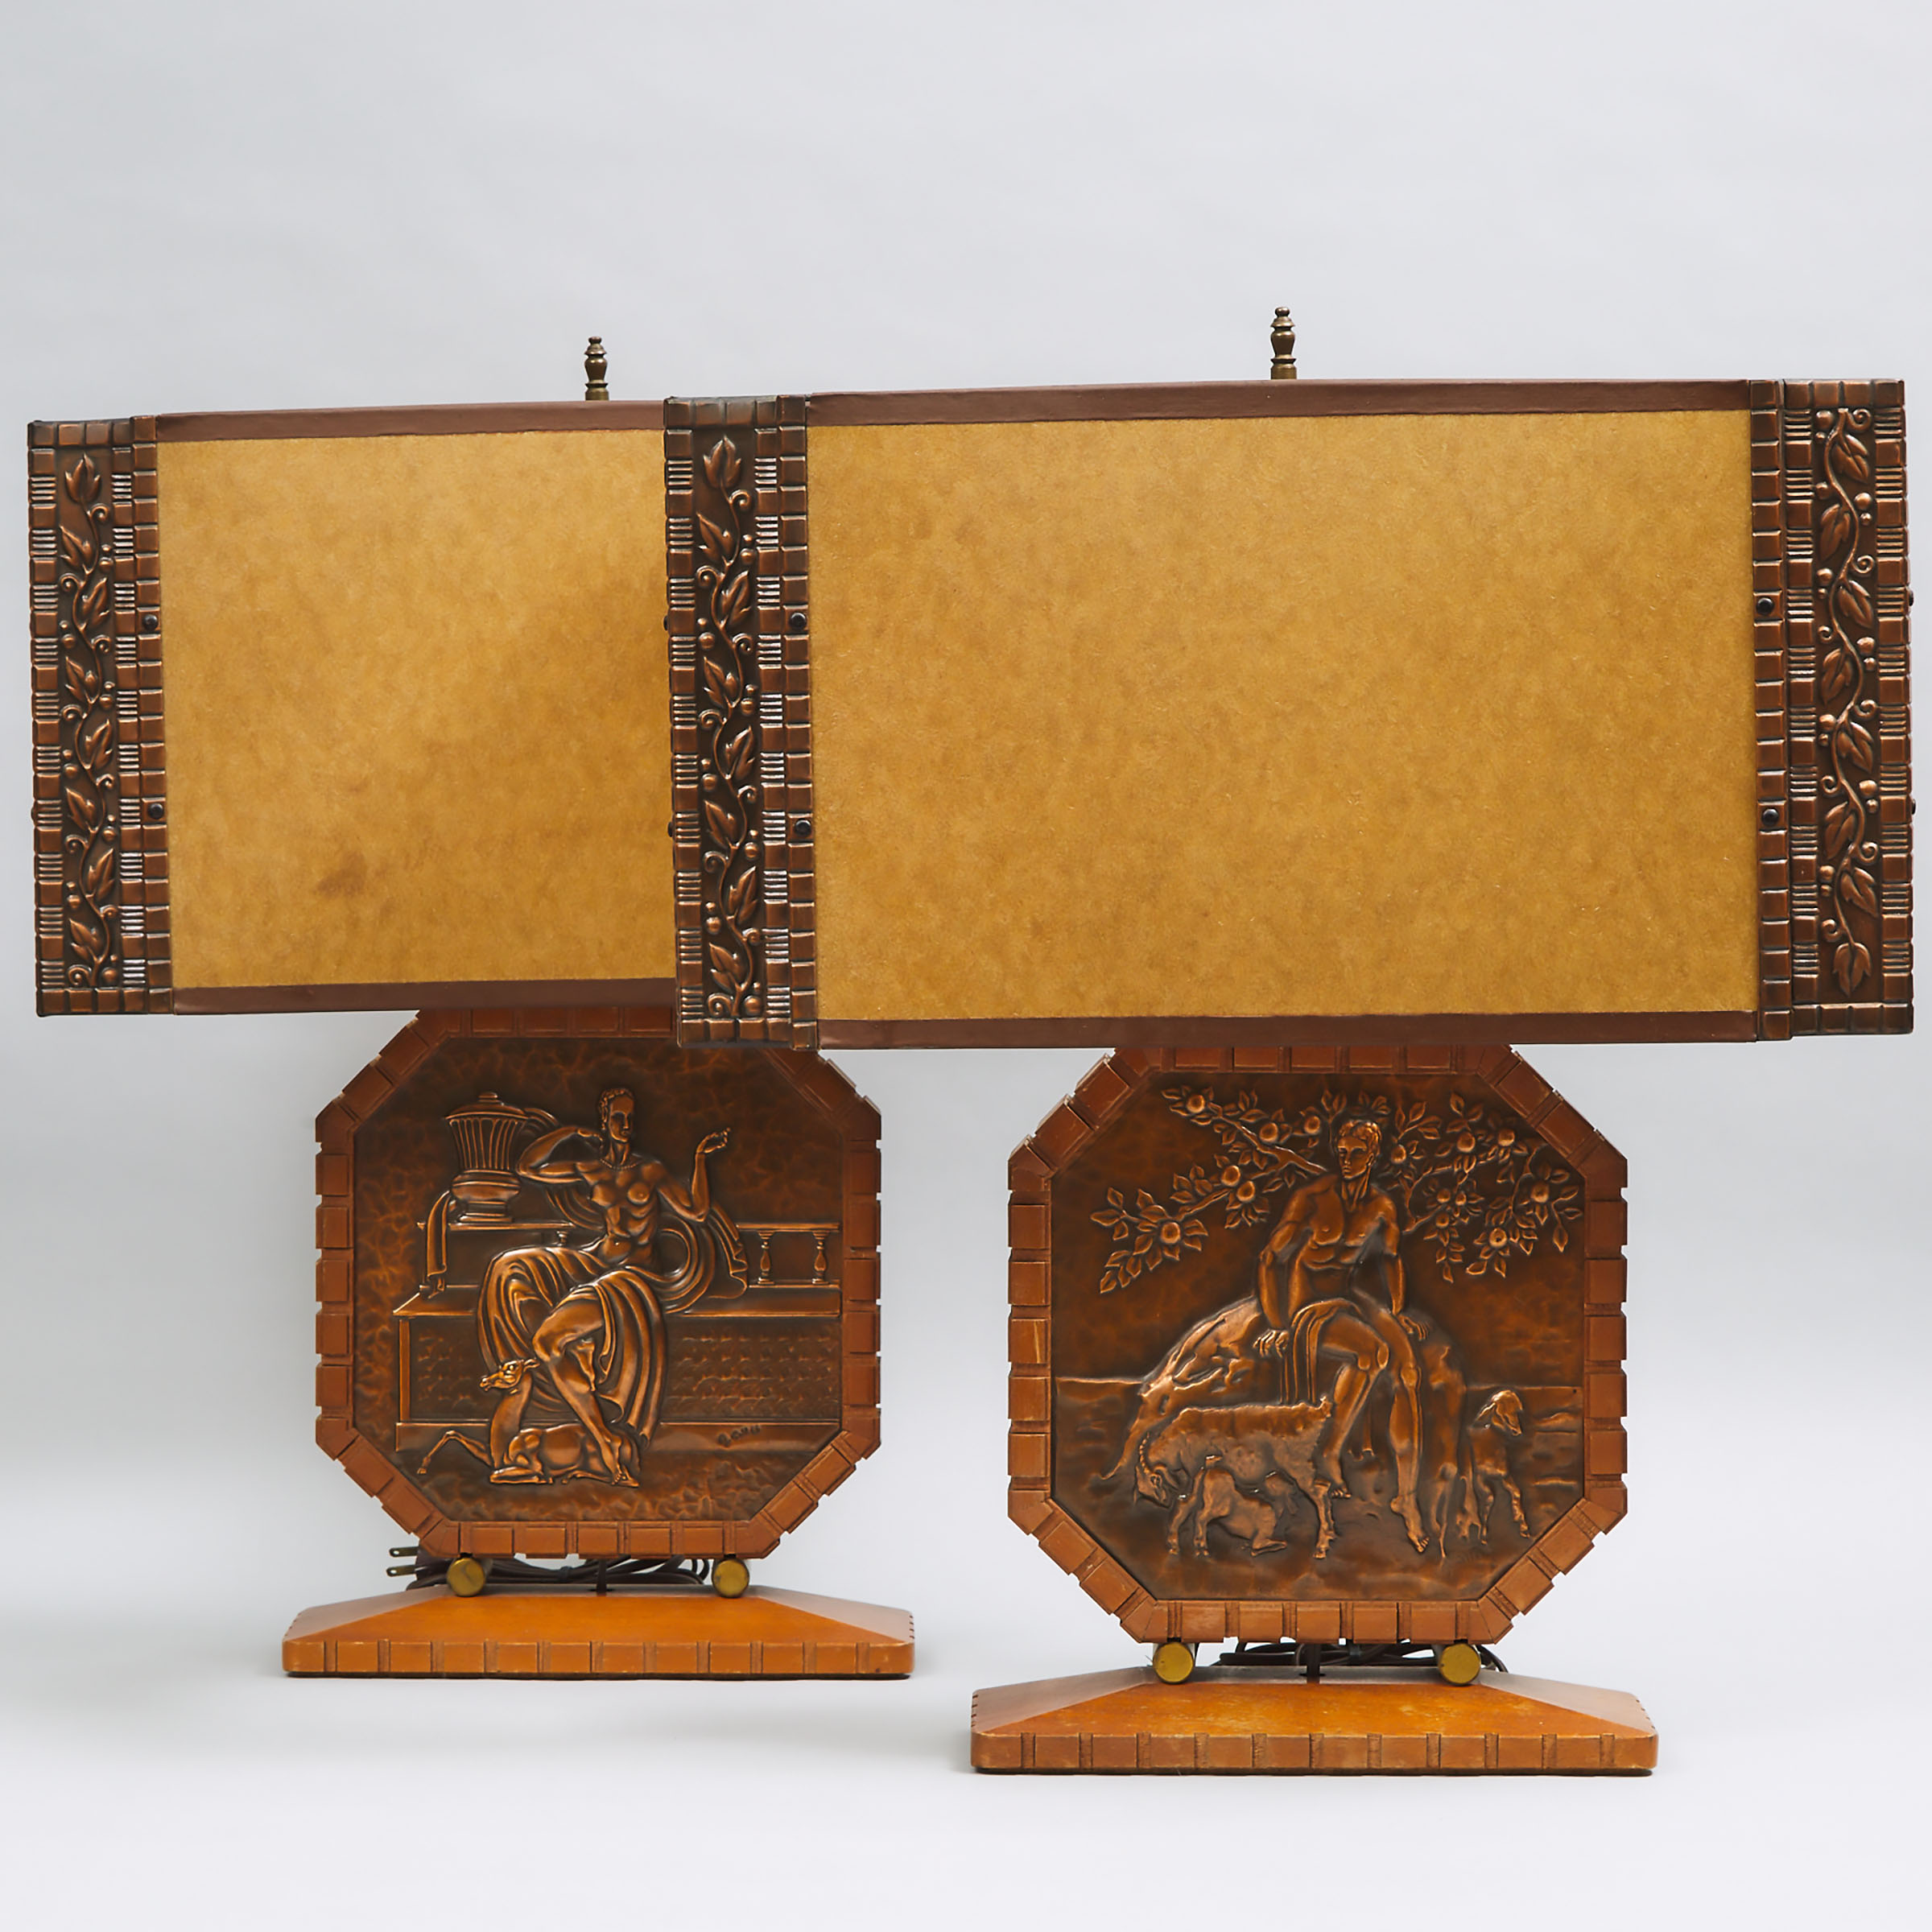 Pair of Canadian Mid Century Modern Table Lamps by Albert Gilles, Château-Richer, Québec, c.1970